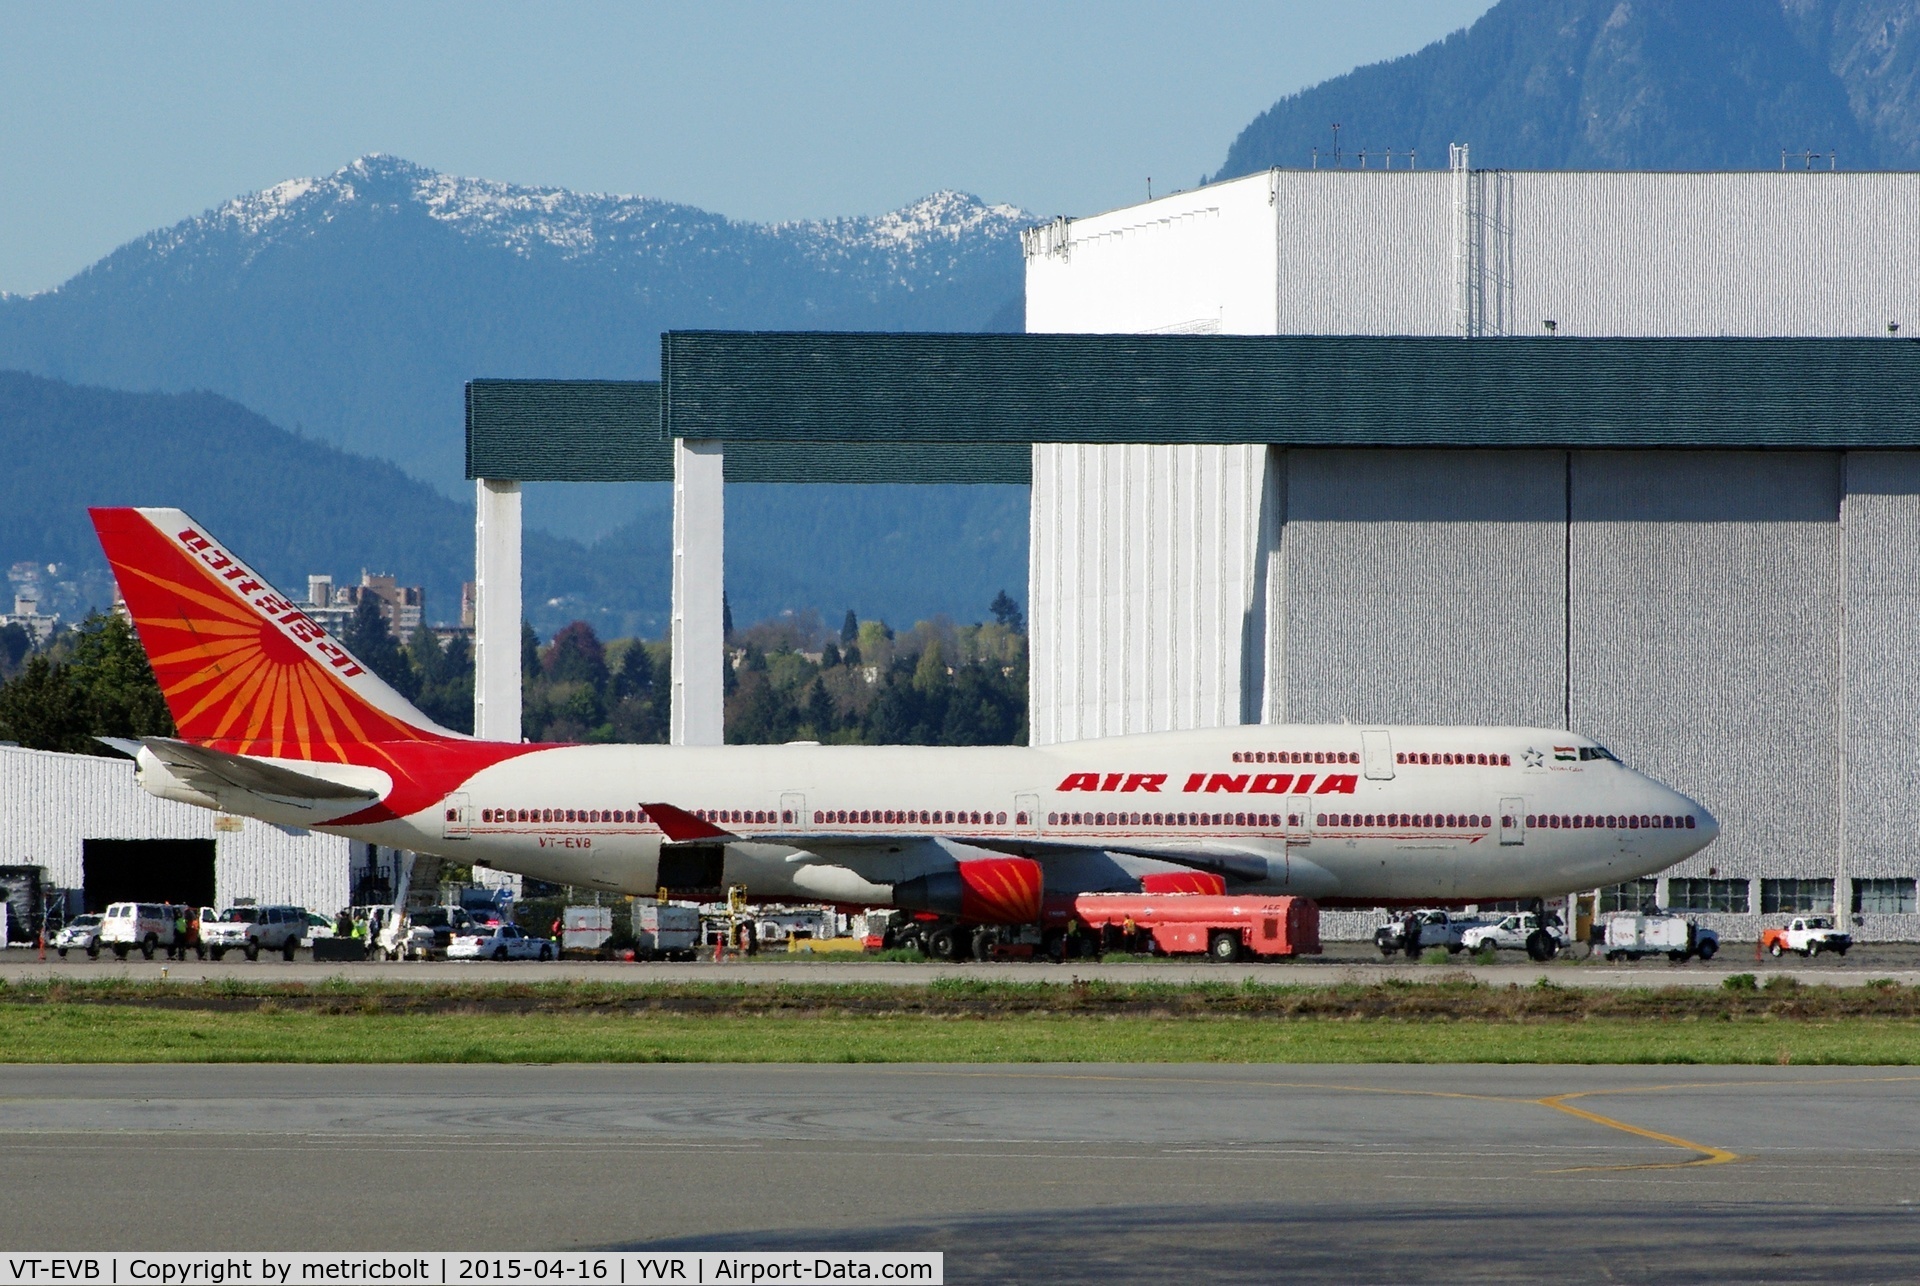 VT-EVB, 1996 Boeing 747-437 C/N 28095, This aircraft brought Indian PM Modi to Vancouver.